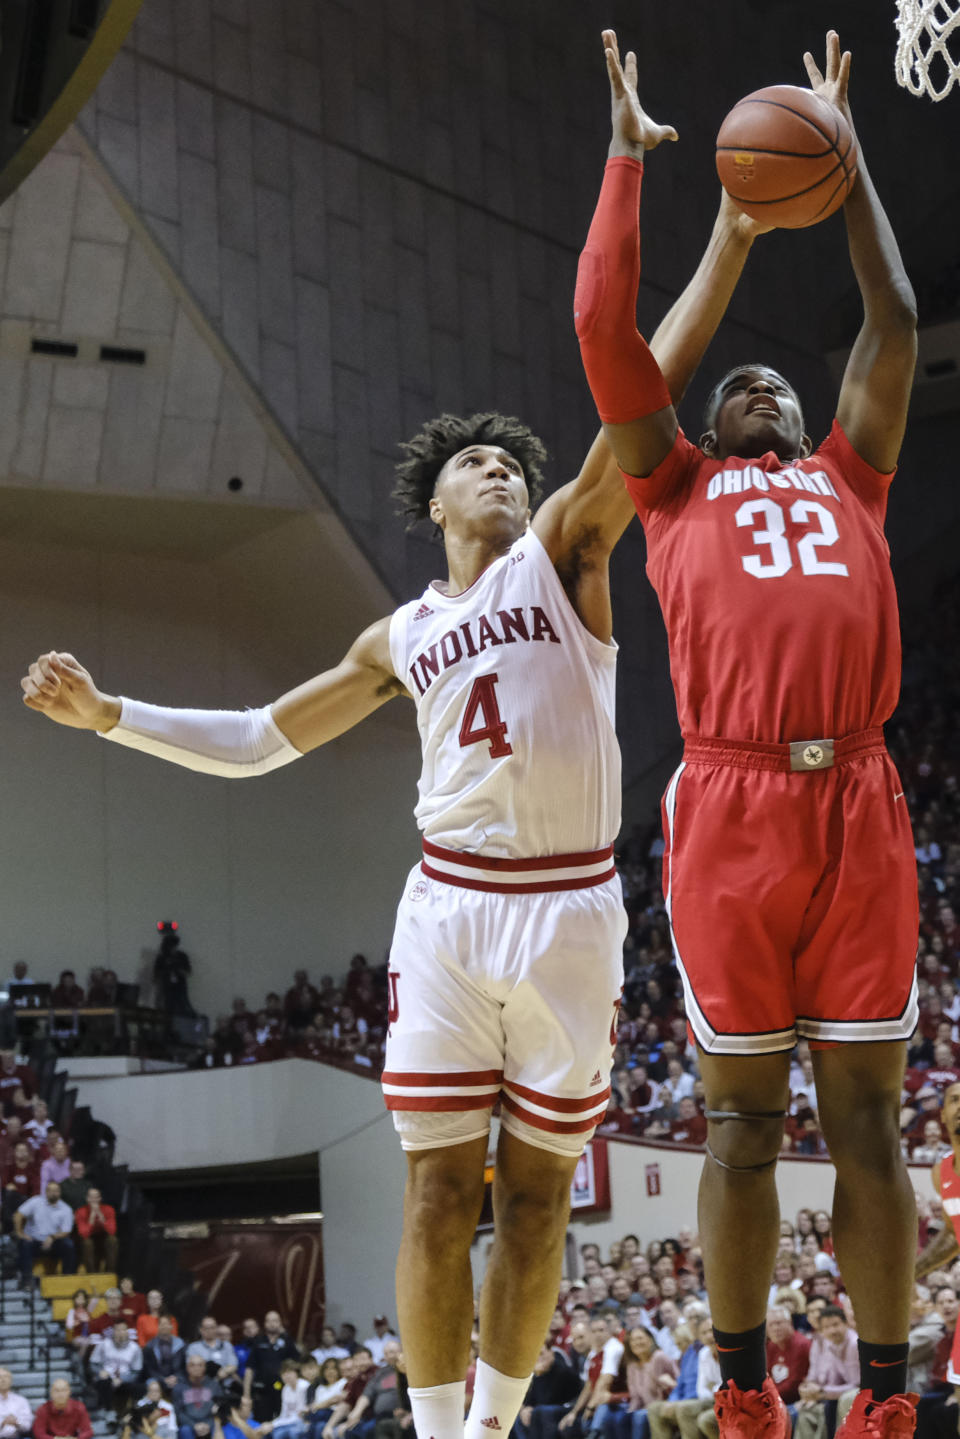 Ohio State forward E.J. Liddell (32) pulls down a rebound in front of Indiana forward Trayce Jackson-Davis (4) in the first half of an NCAA college basketball game in Bloomington, Ind., Saturday, Jan. 11, 2020. (AP Photo/AJ Mast)